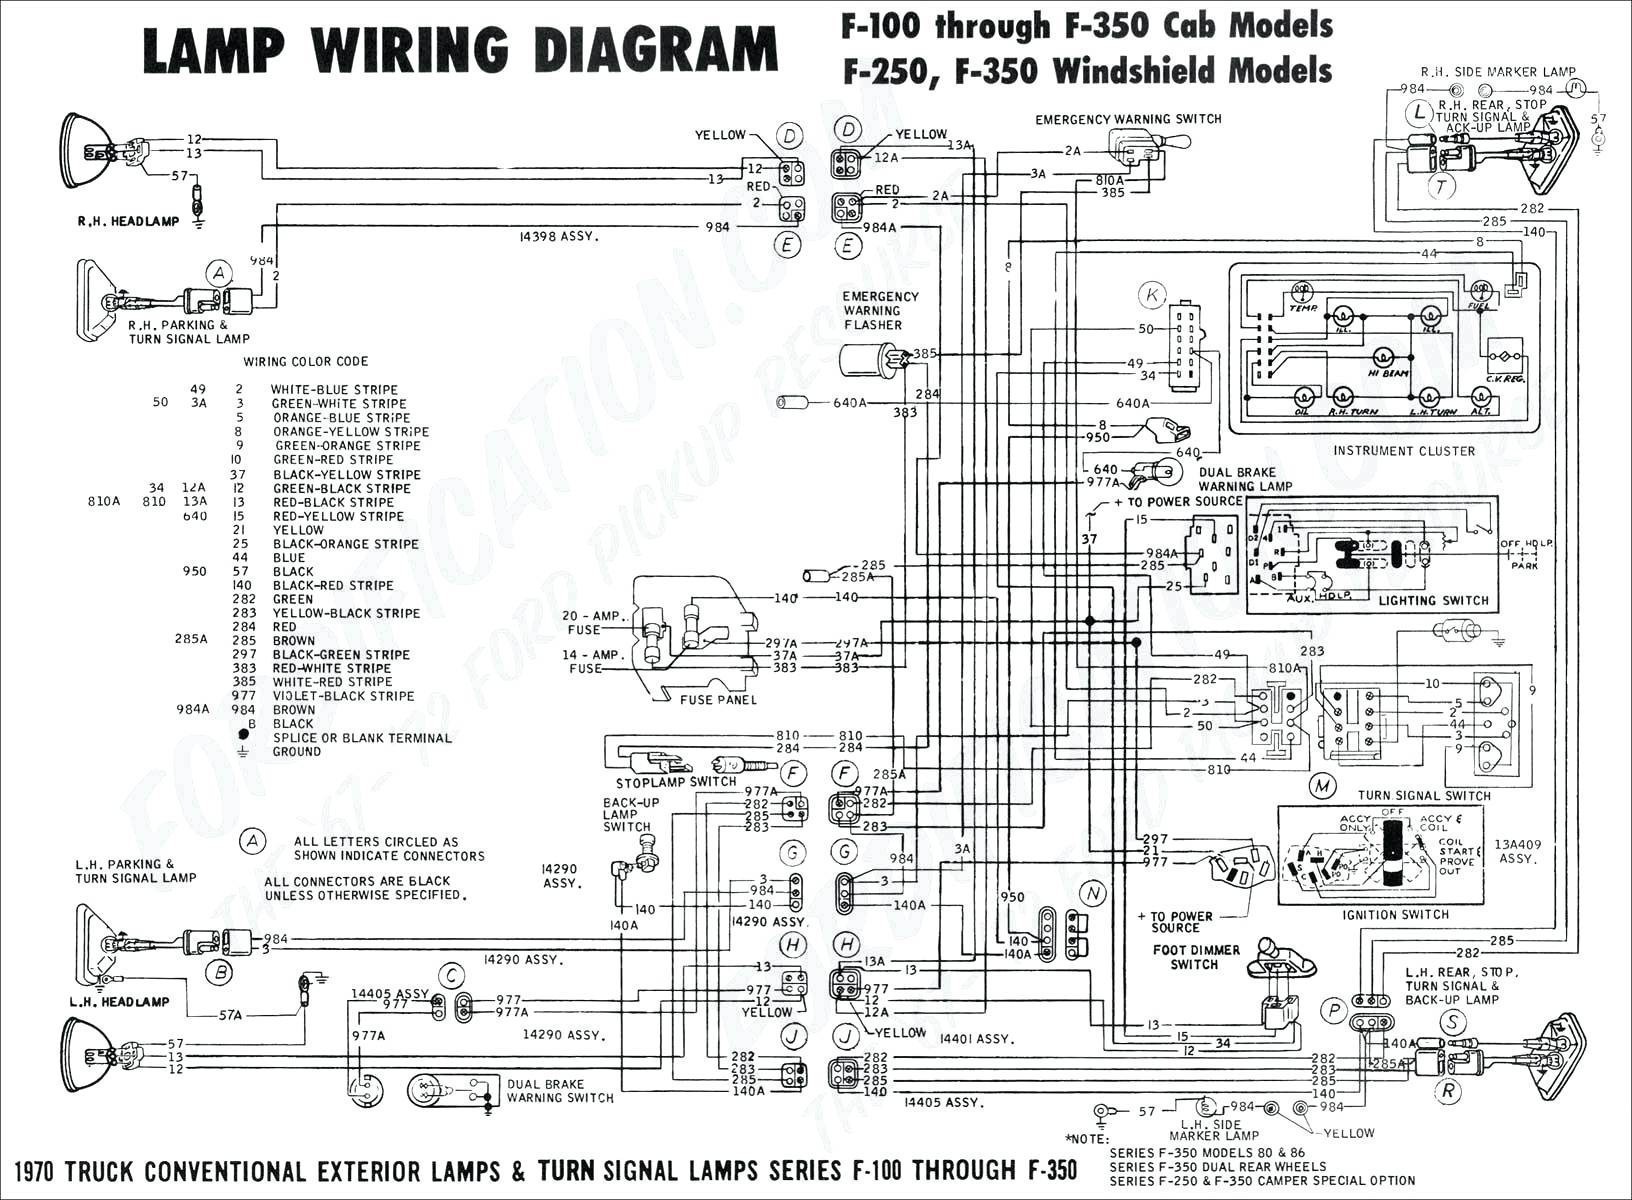 Williams Wall Furnace Wiring Diagram Best Wiring Diagram Mitsubishi Space Wagon 4wd Archives